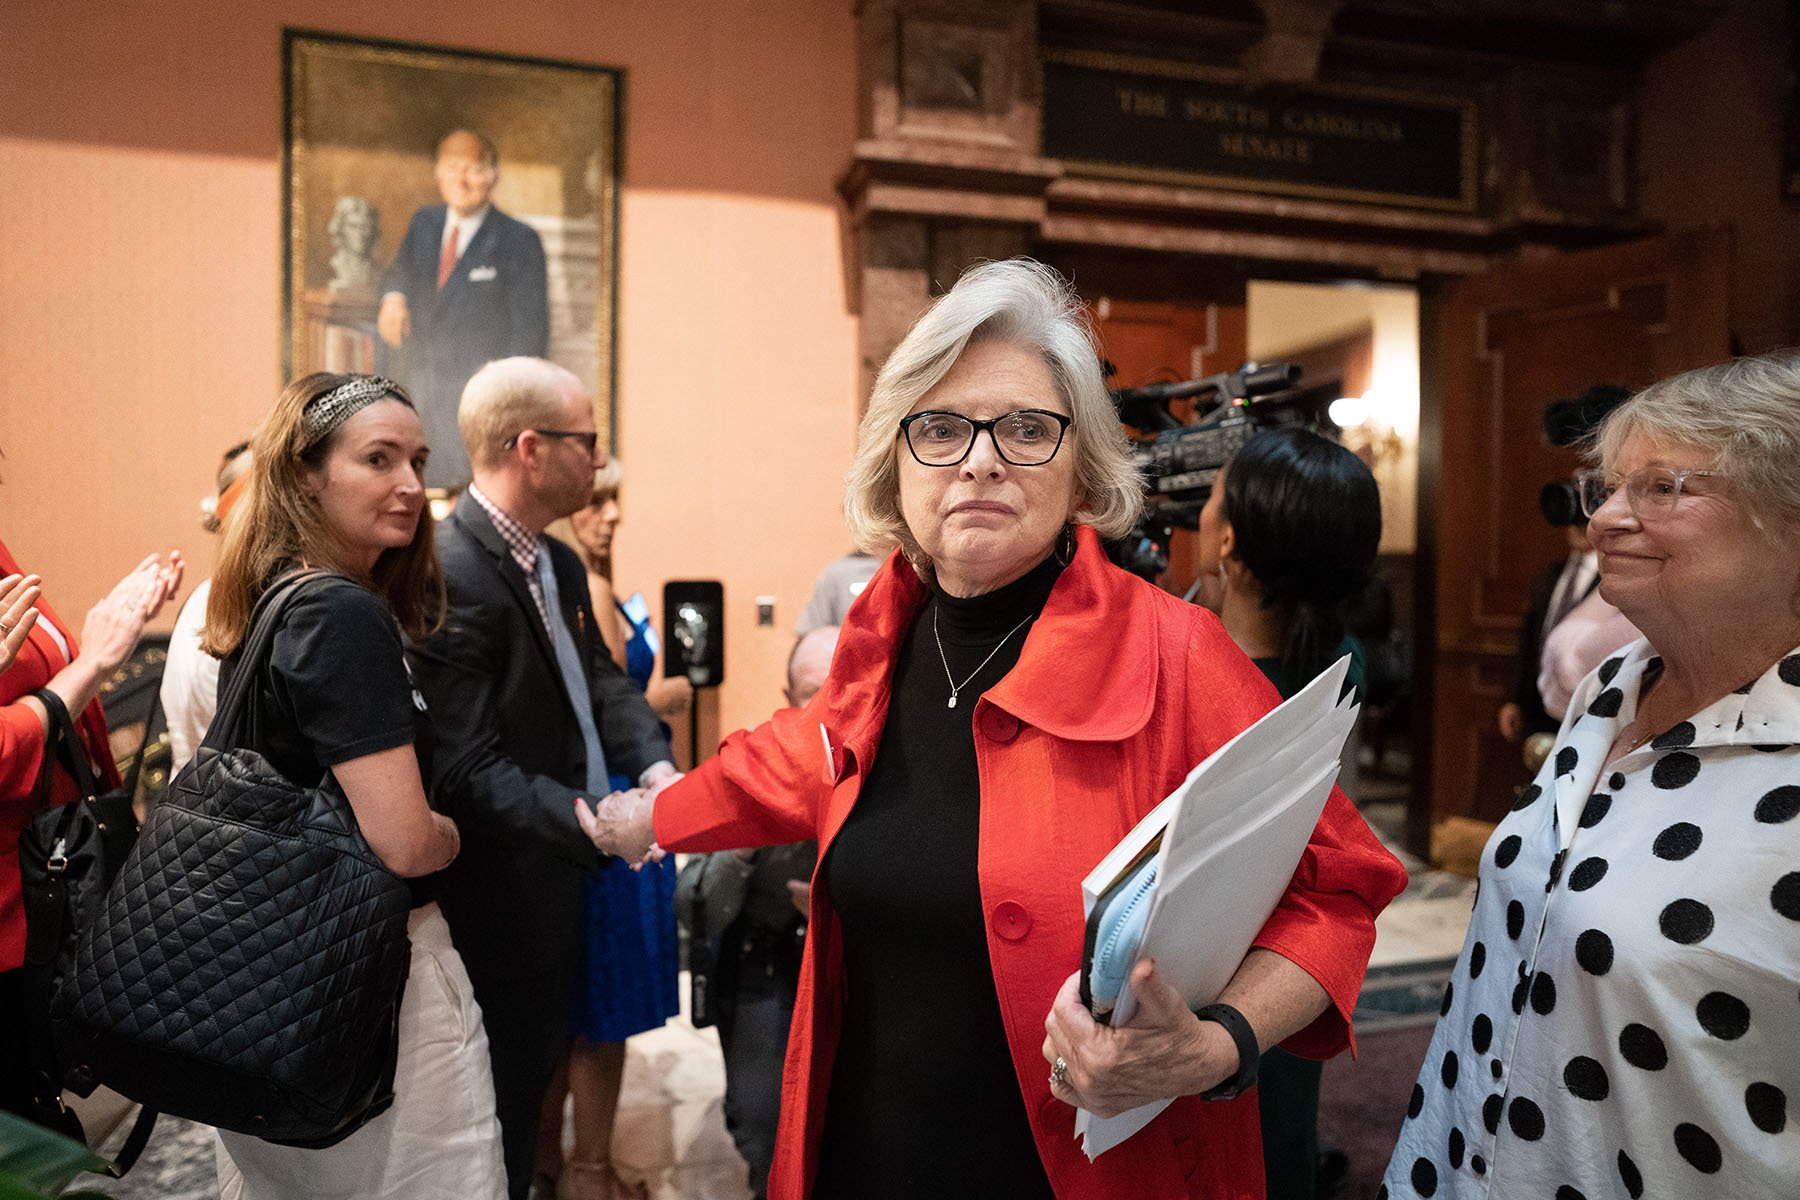 Republican state Sen. Katrina Shealy receives applause from supporters as she walks through the South Carolina Capitol.